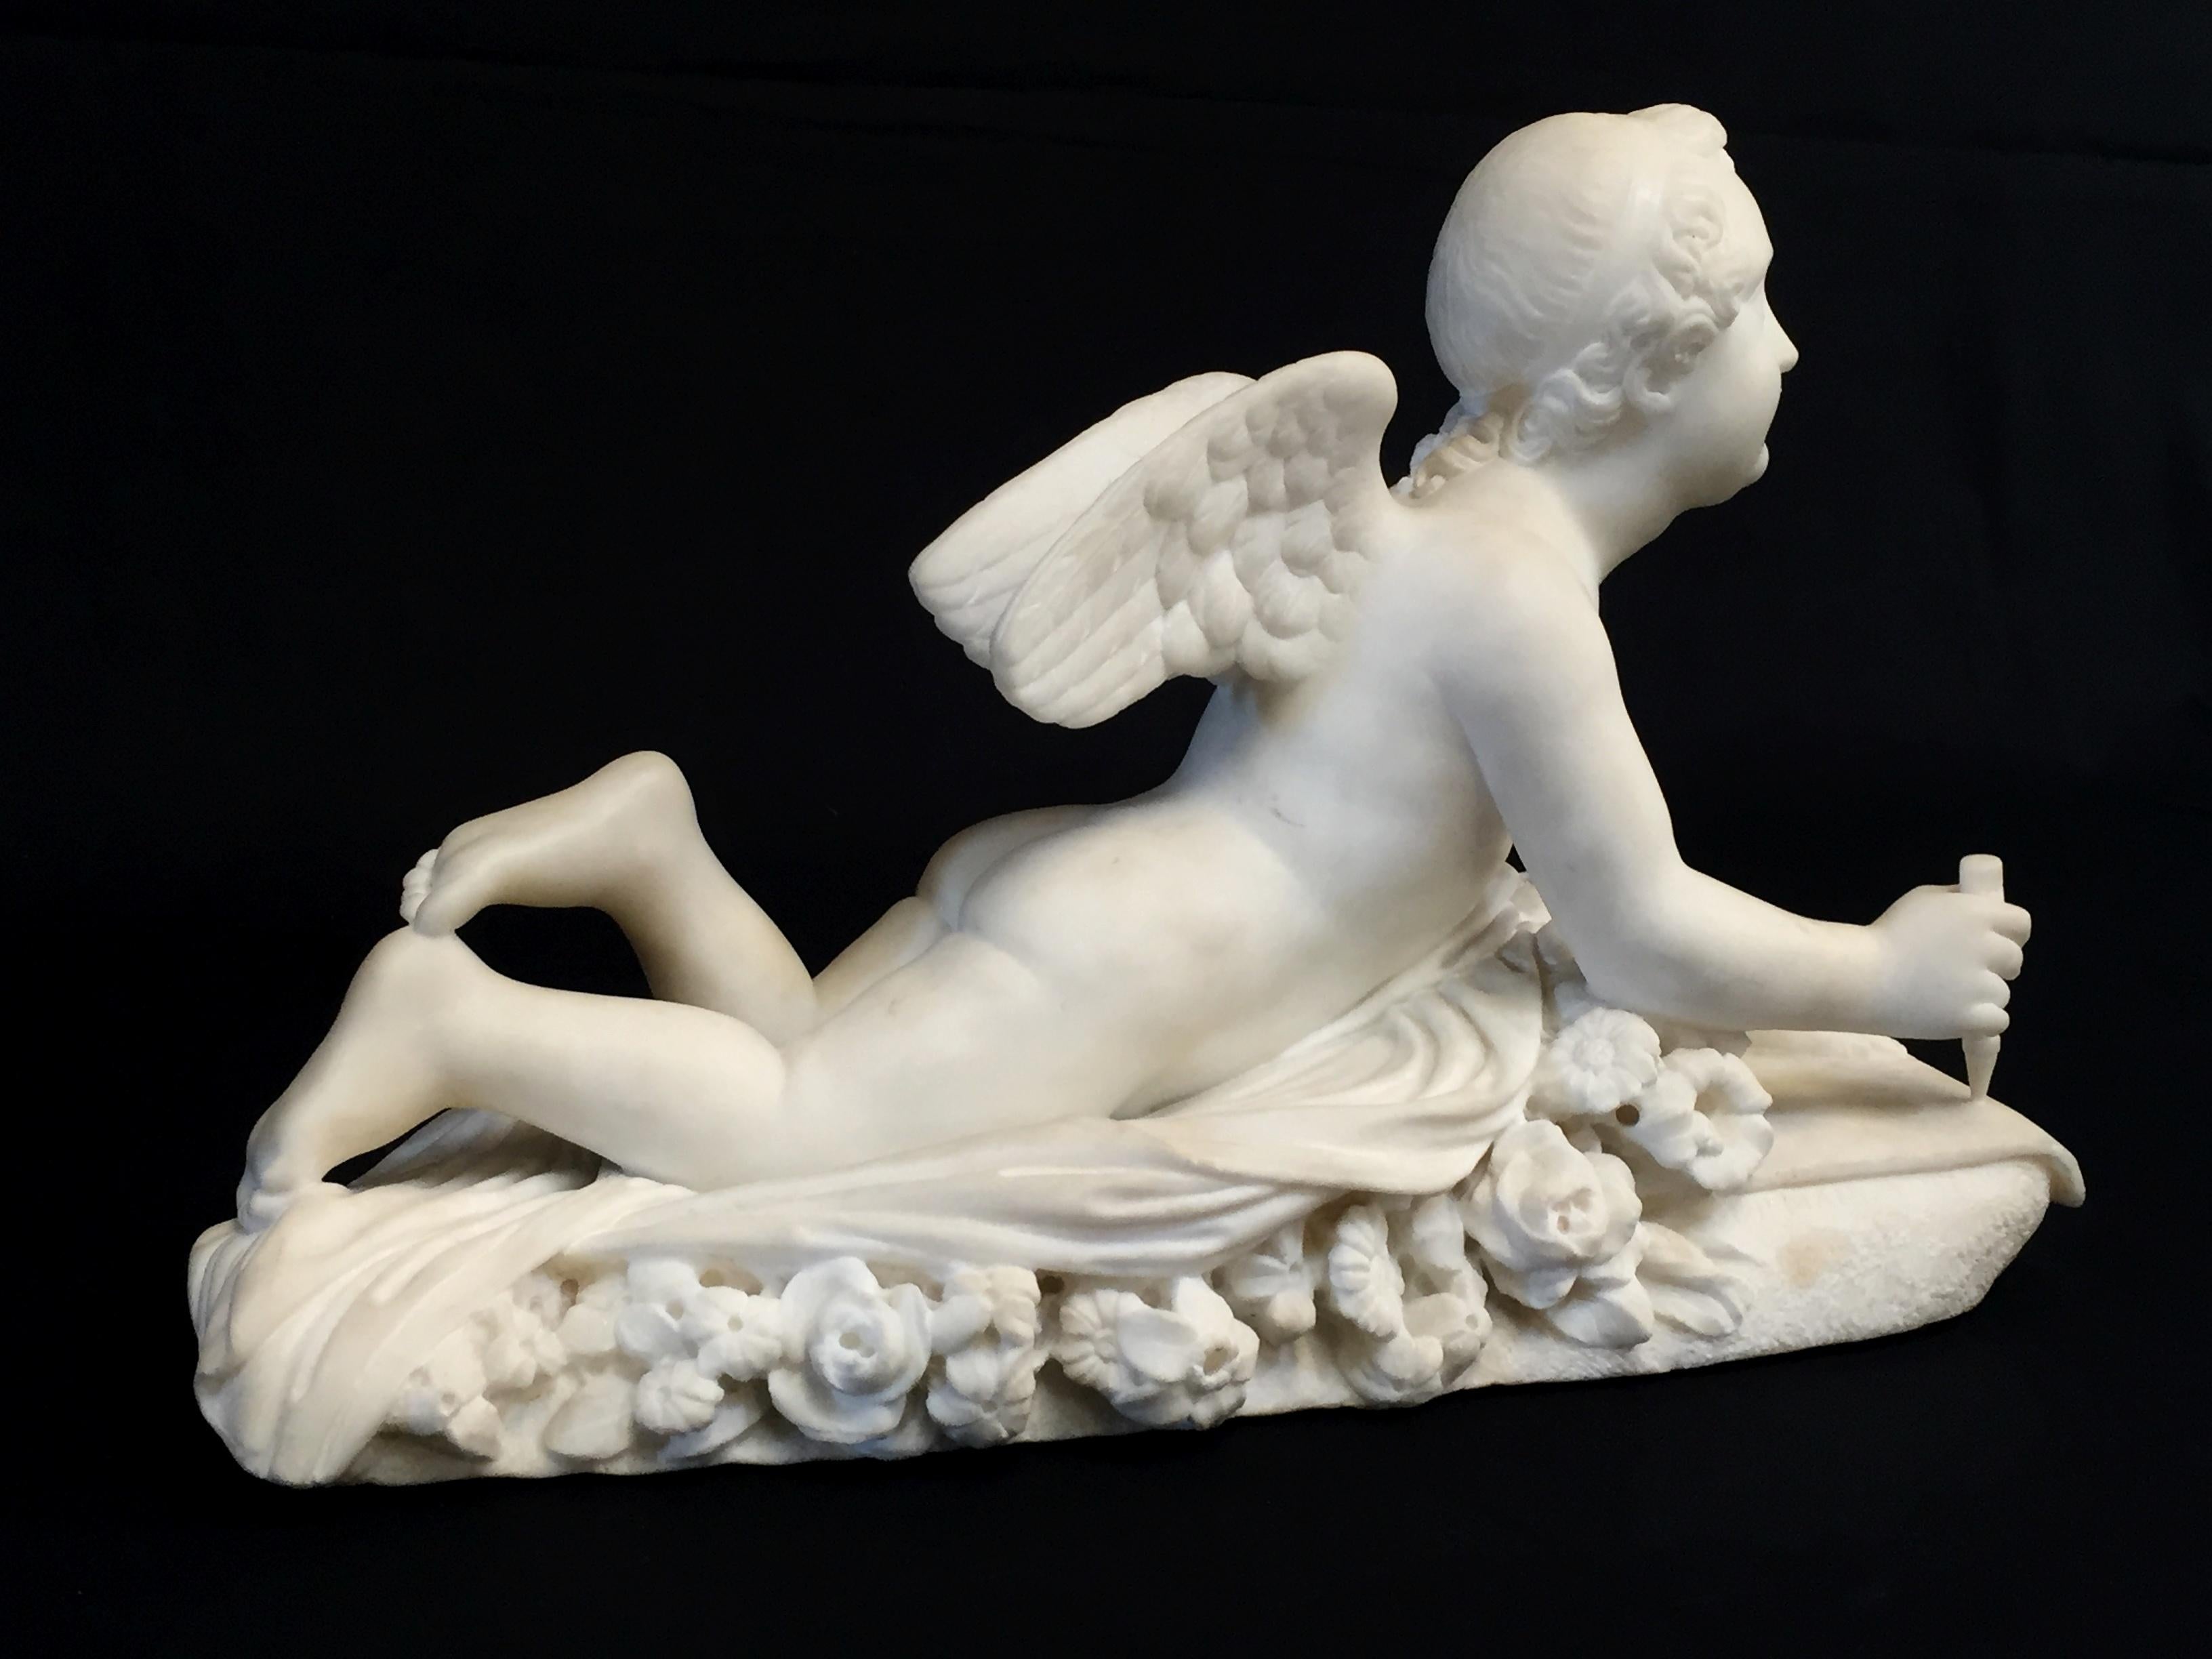 19th century, Italian white marble sculpture by Pompeo Marchesi with cupid, Italy, 1840

This valuable sculpture, made in white marble in 1840, is a work signed by Pompeo Marchesi.
It represents a cupid who writes. The cupid is the mythological